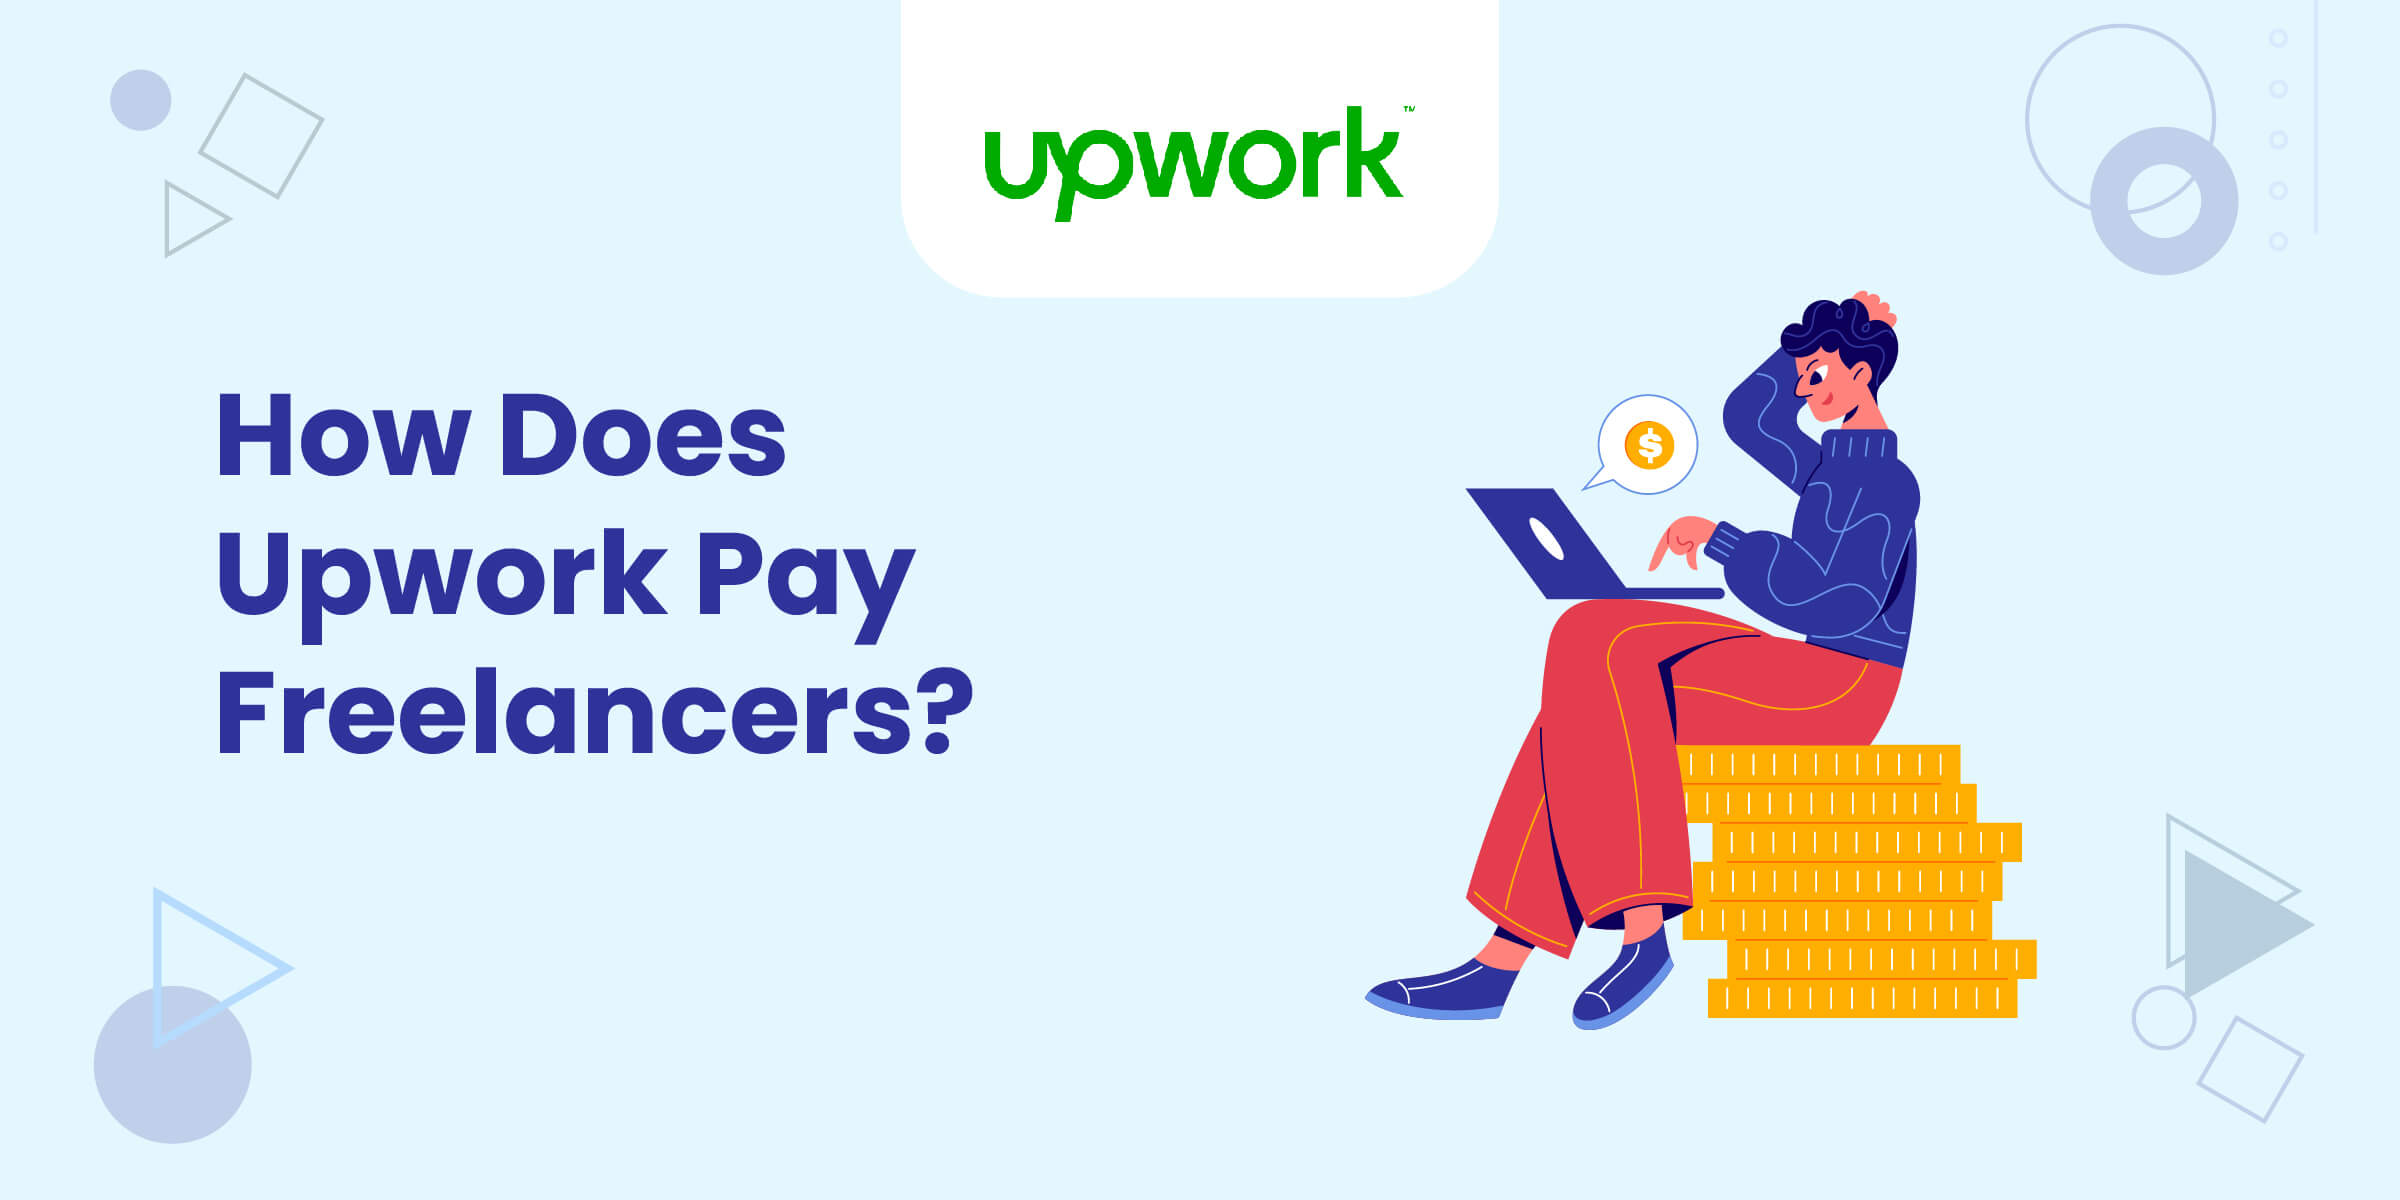 How Does Upwork Pay Freelancers